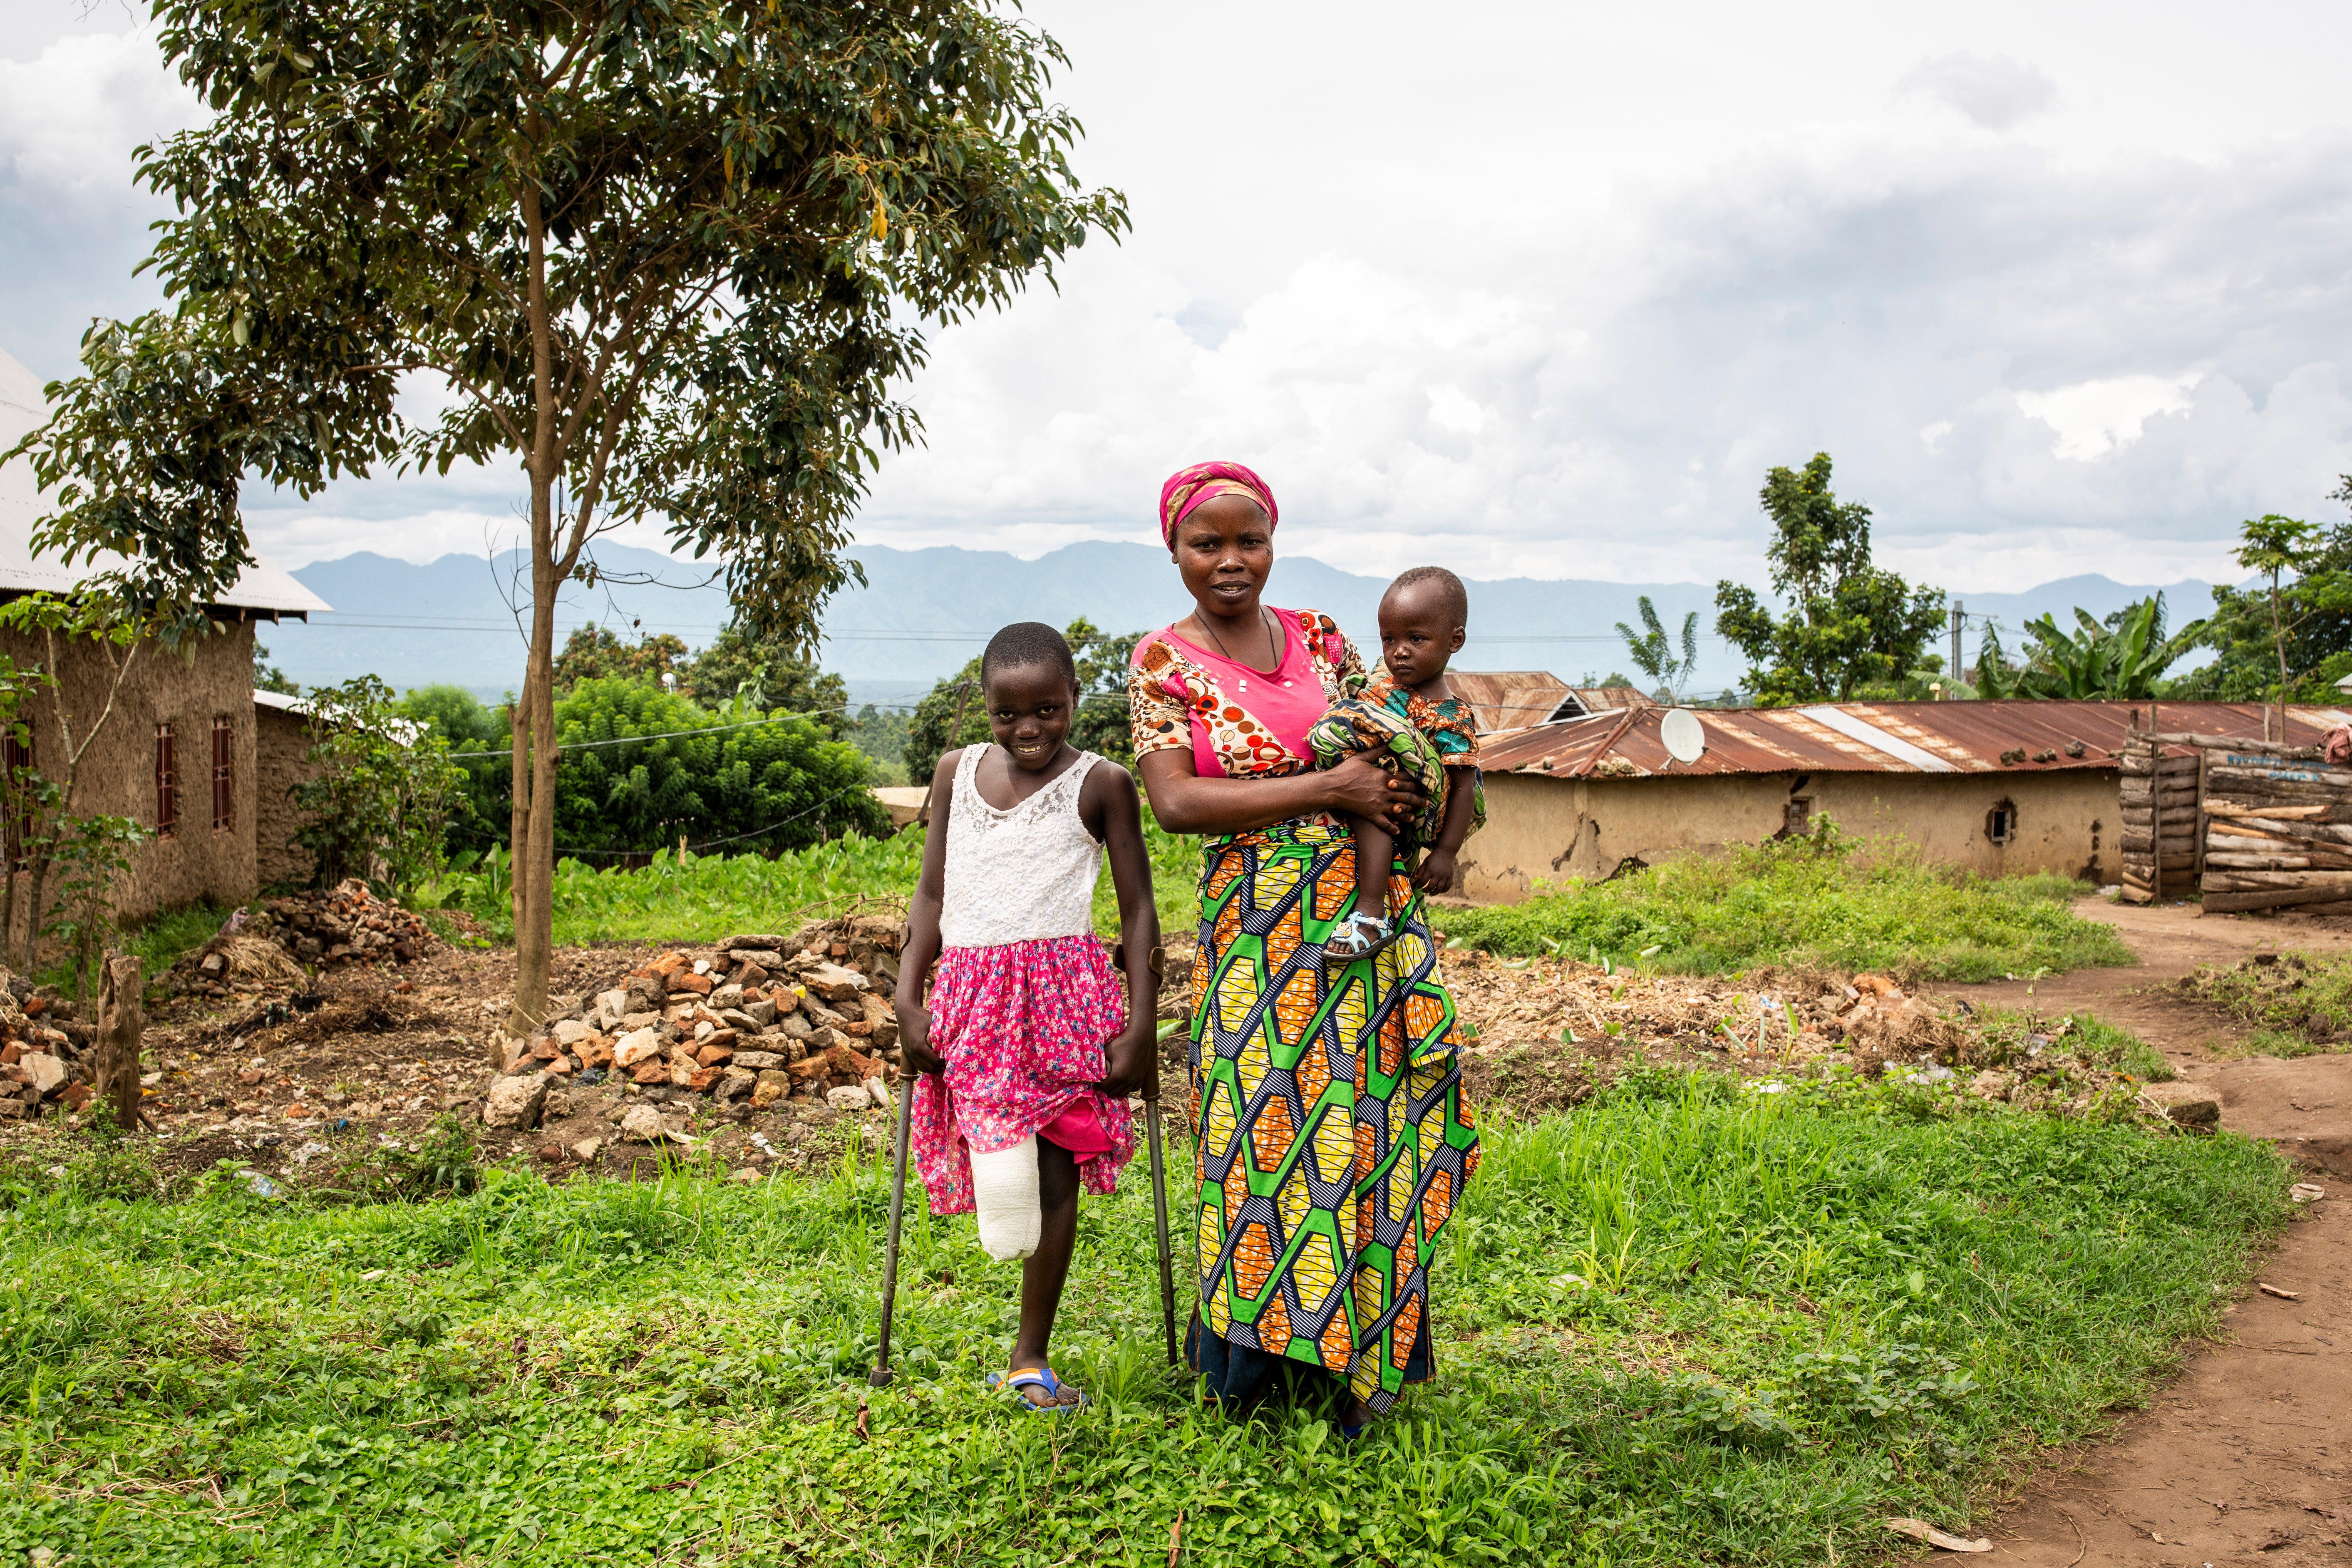 A woman with her two children. She holds a baby in her arms and is next to a young girl on the left who smiles as she uses crutches to support her one leg. 